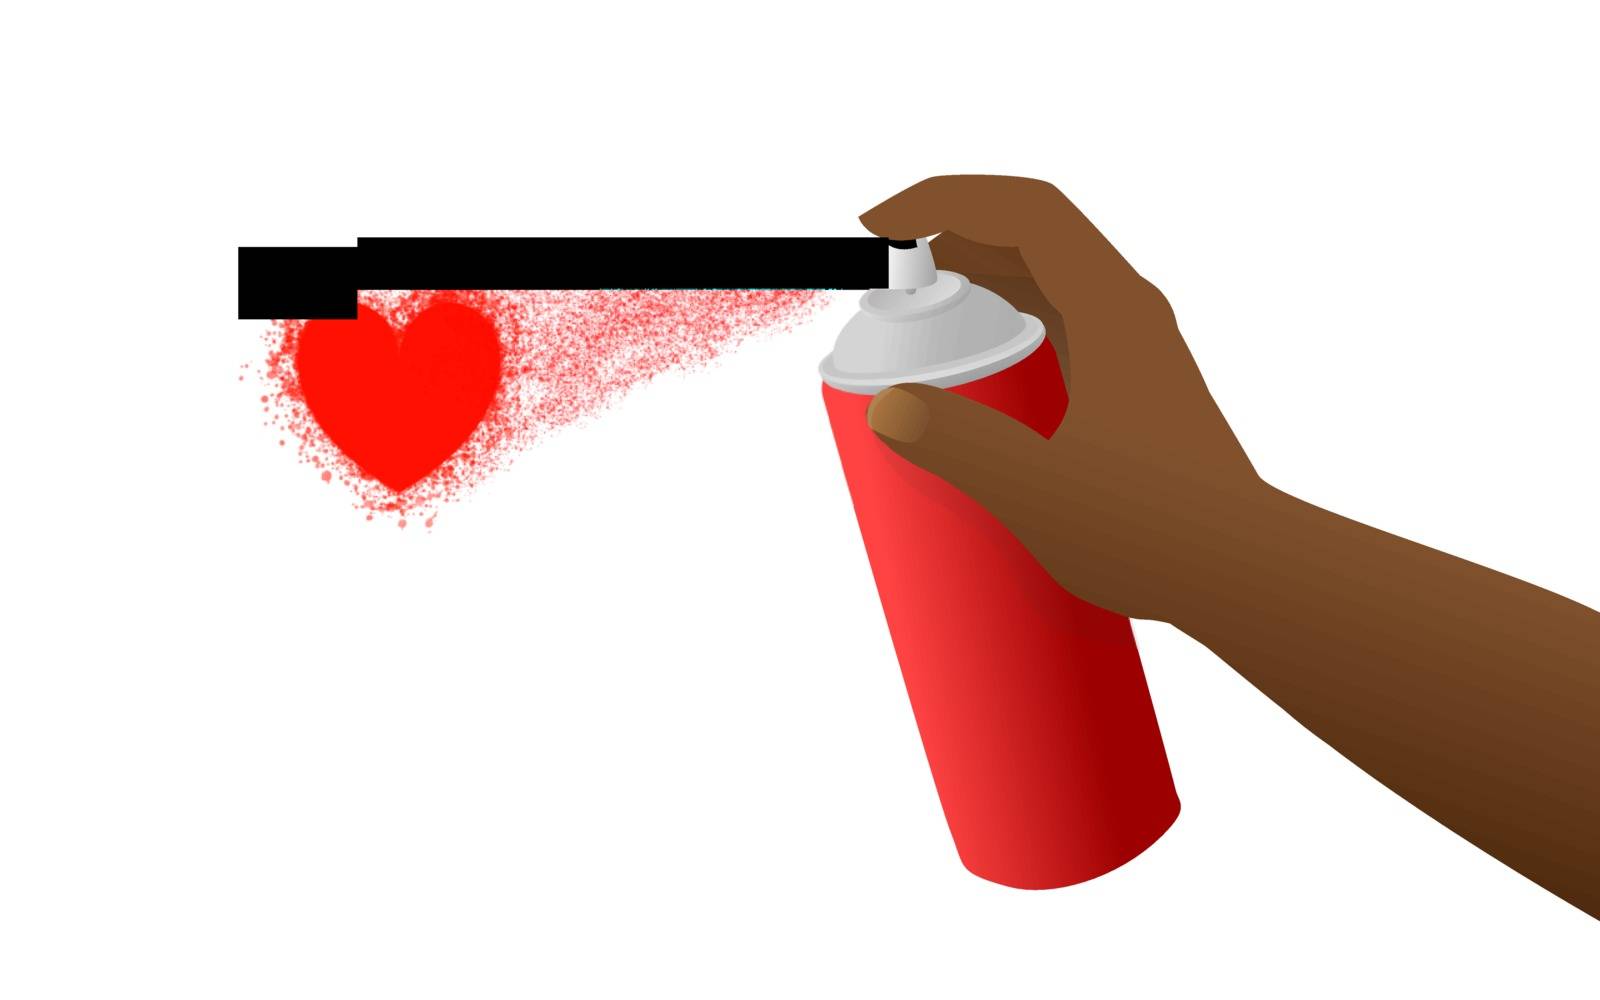 An illustration of a black hand that is spraying a red heart